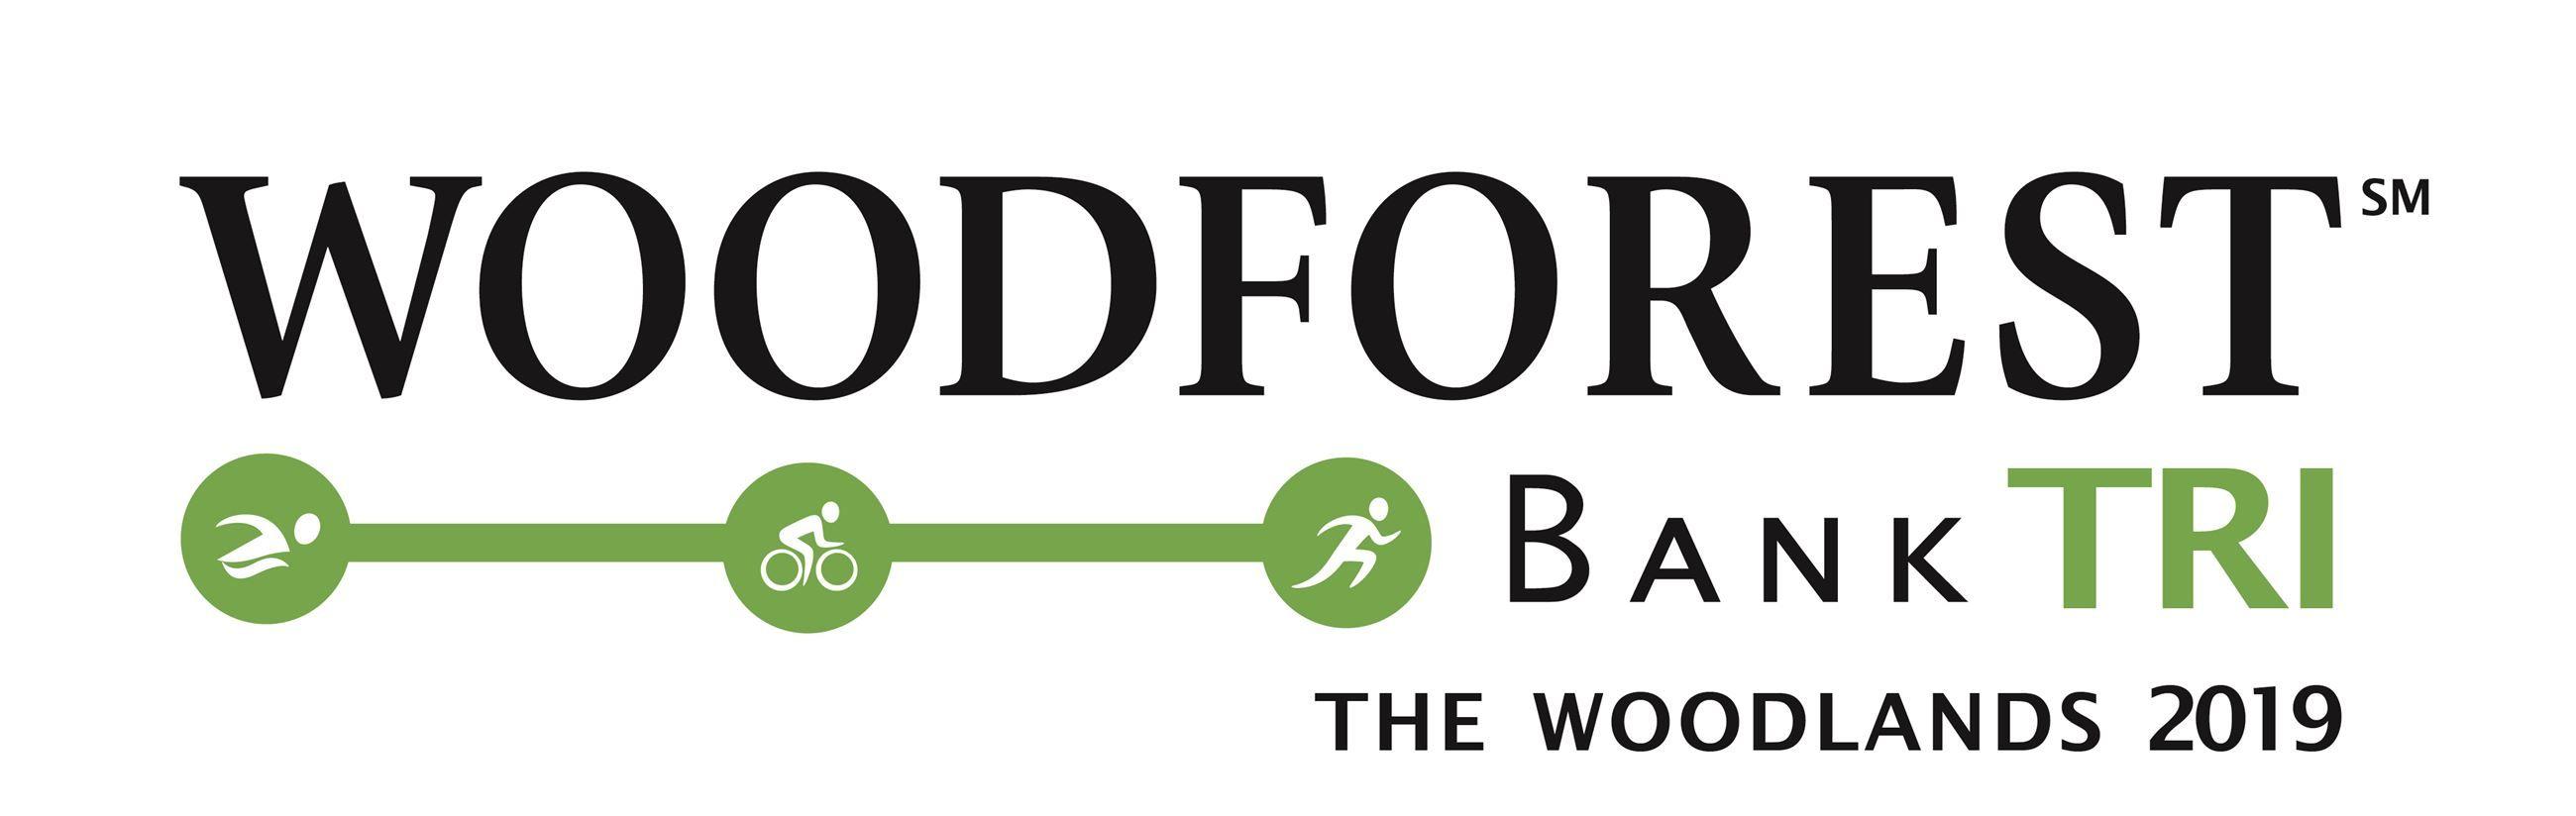 Woodforest Logo - The Woodlands Township, TX